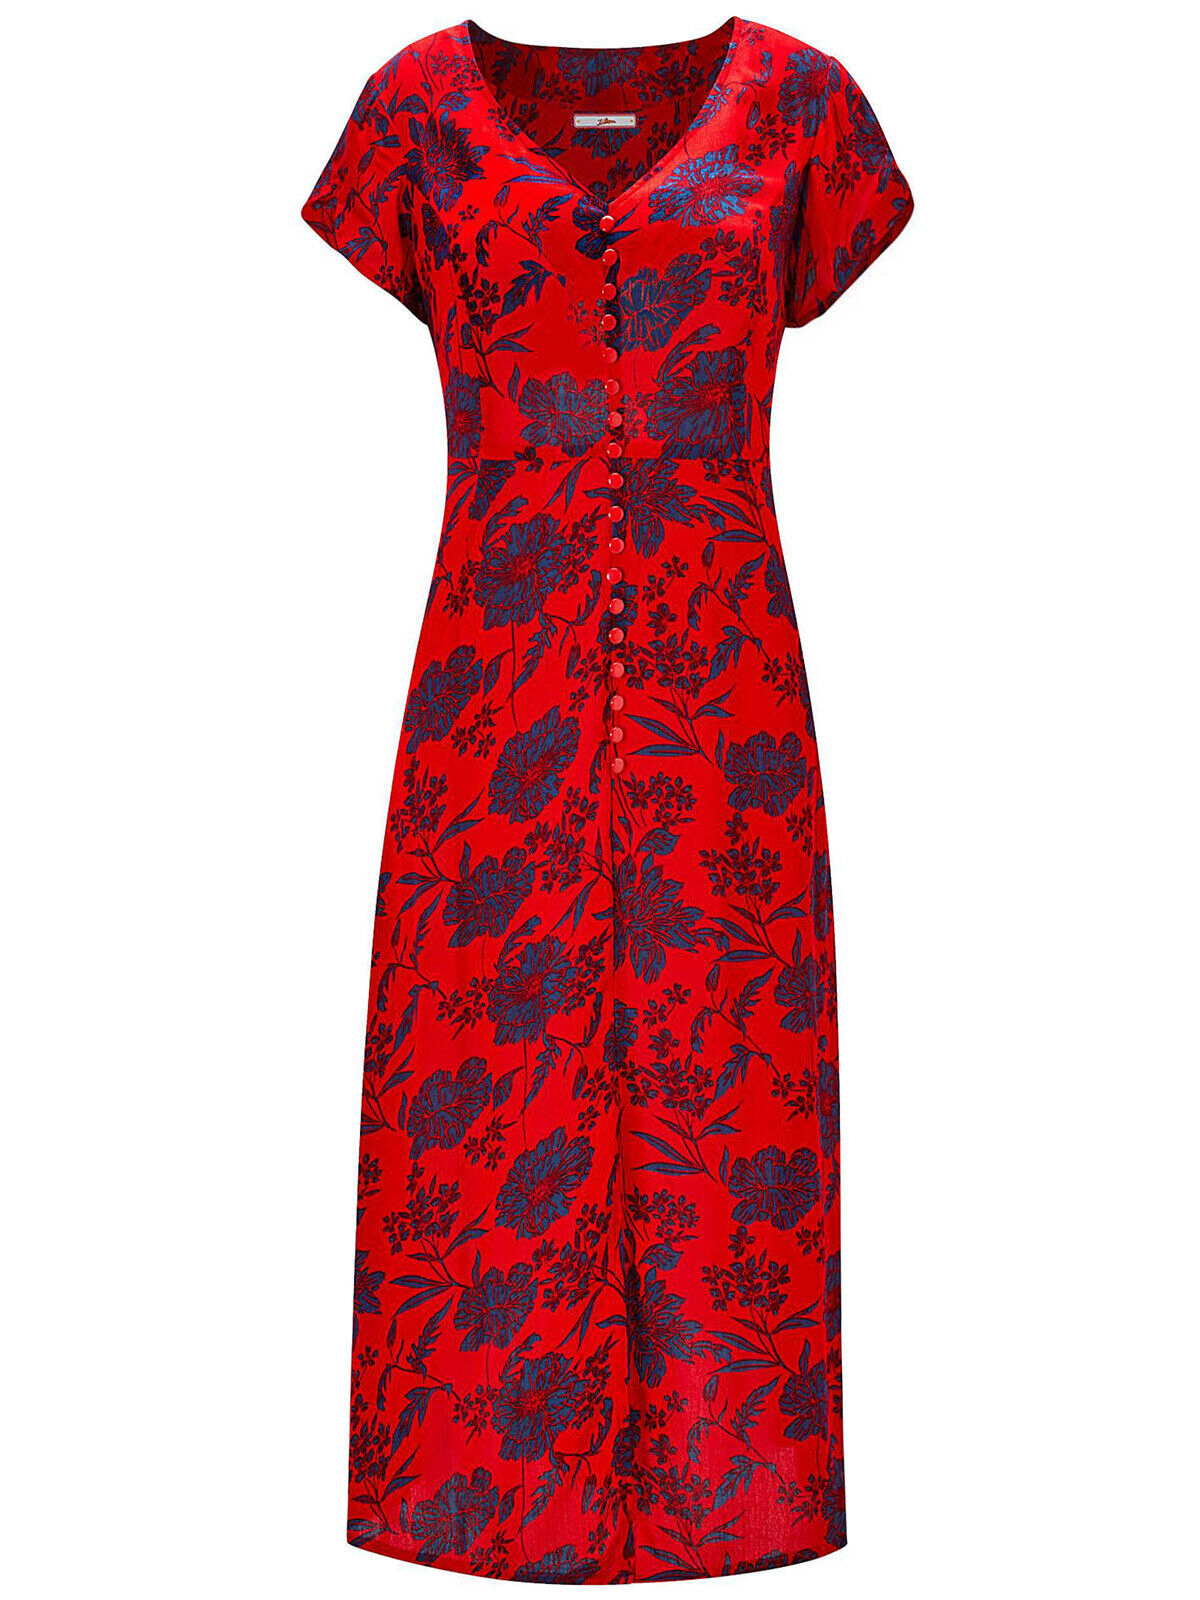 Joe Browns Red Multi Print All New Summer Sizzling Dress in Size 32